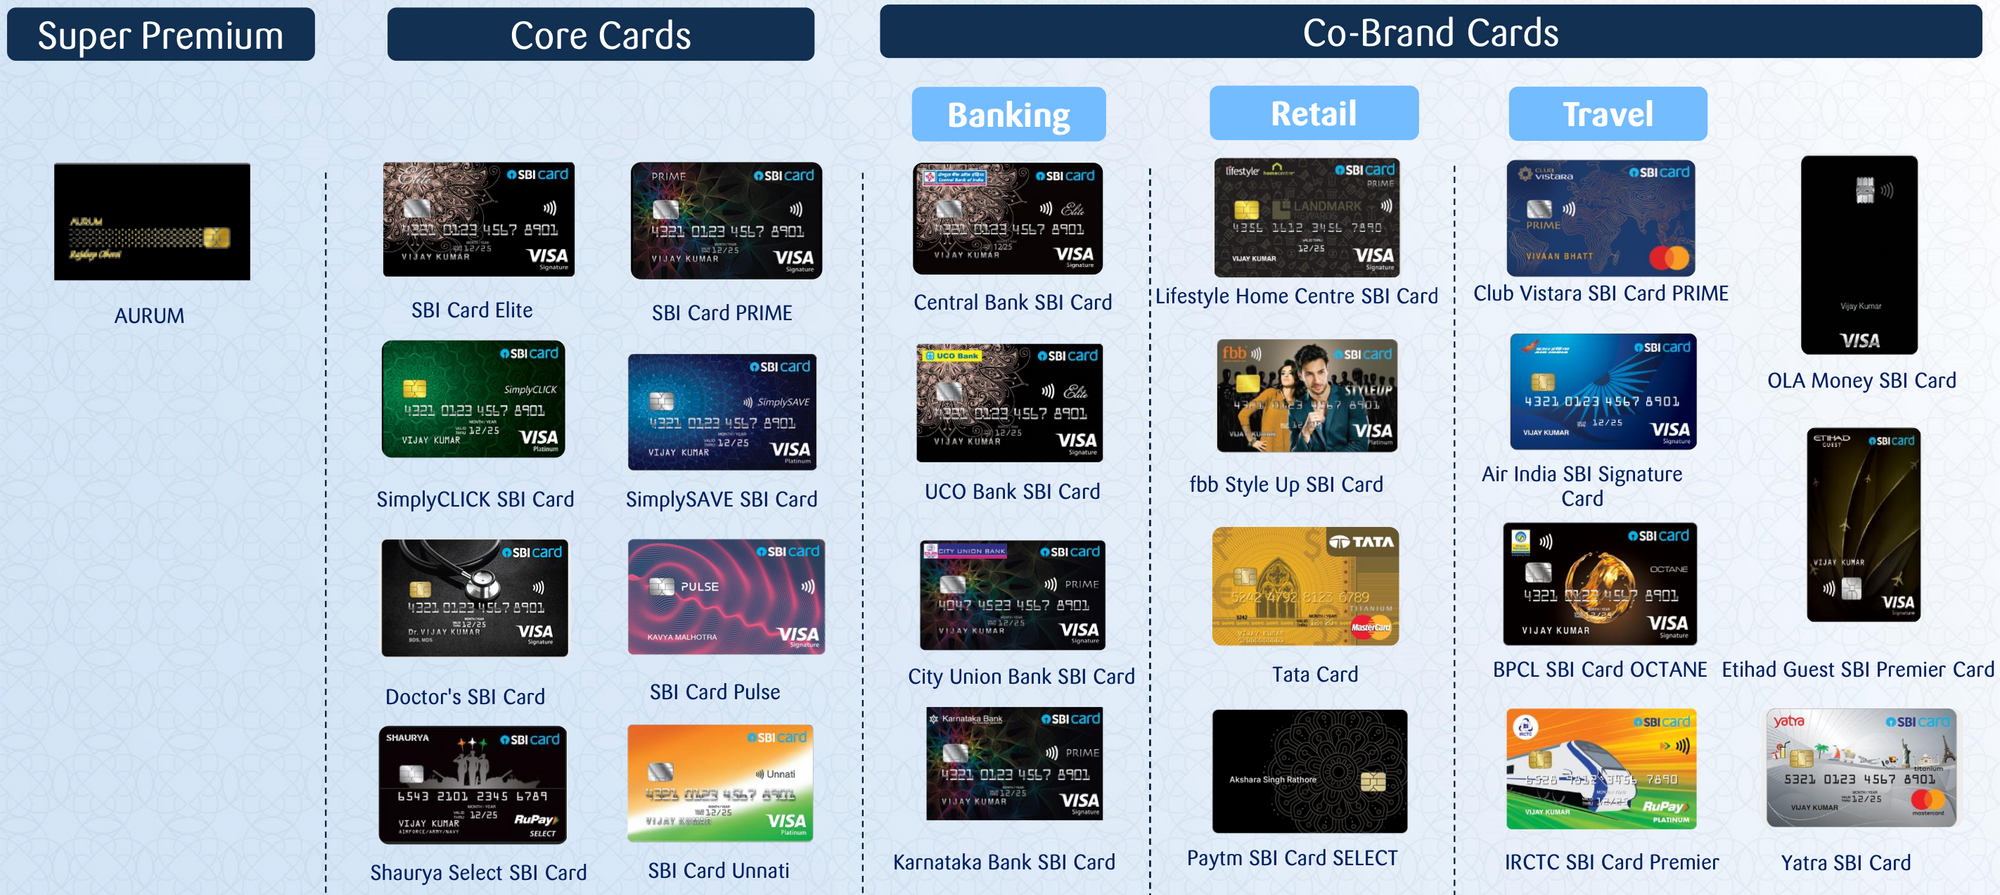 SBI's catalogue of credit cards